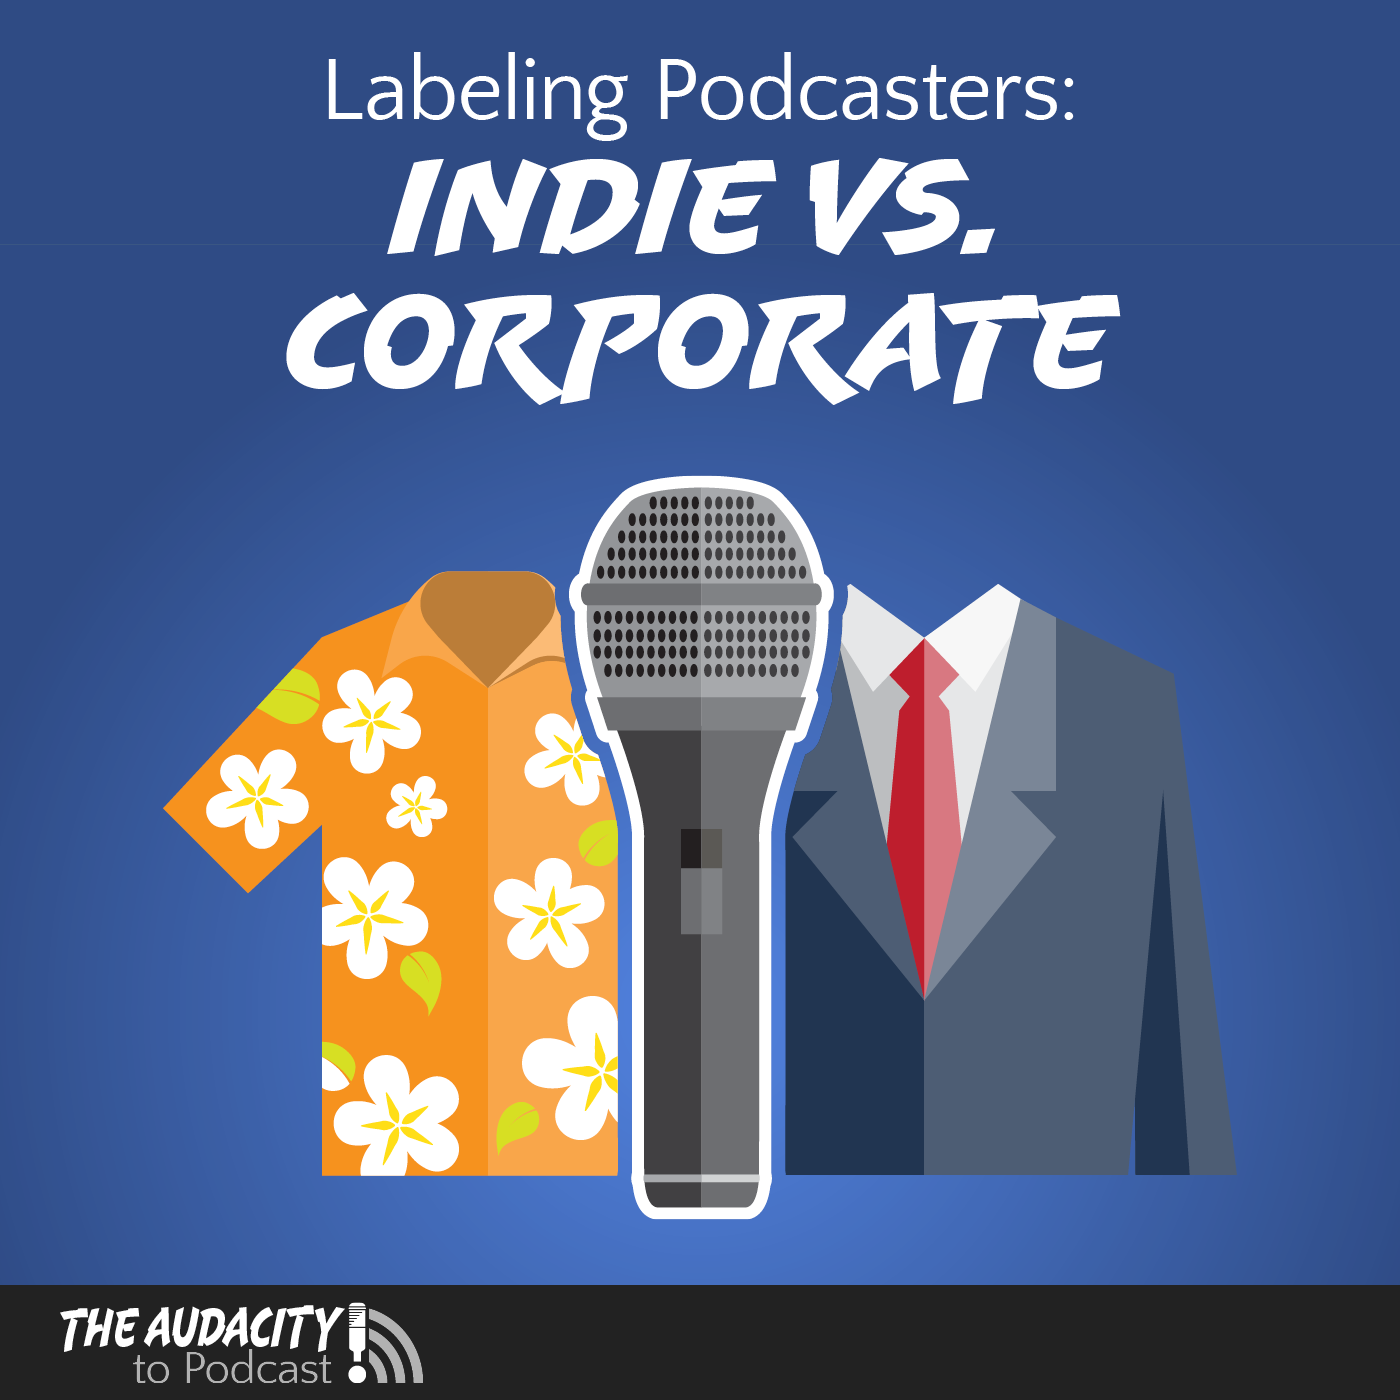 Labeling Podcasters: Independent vs. Corporate